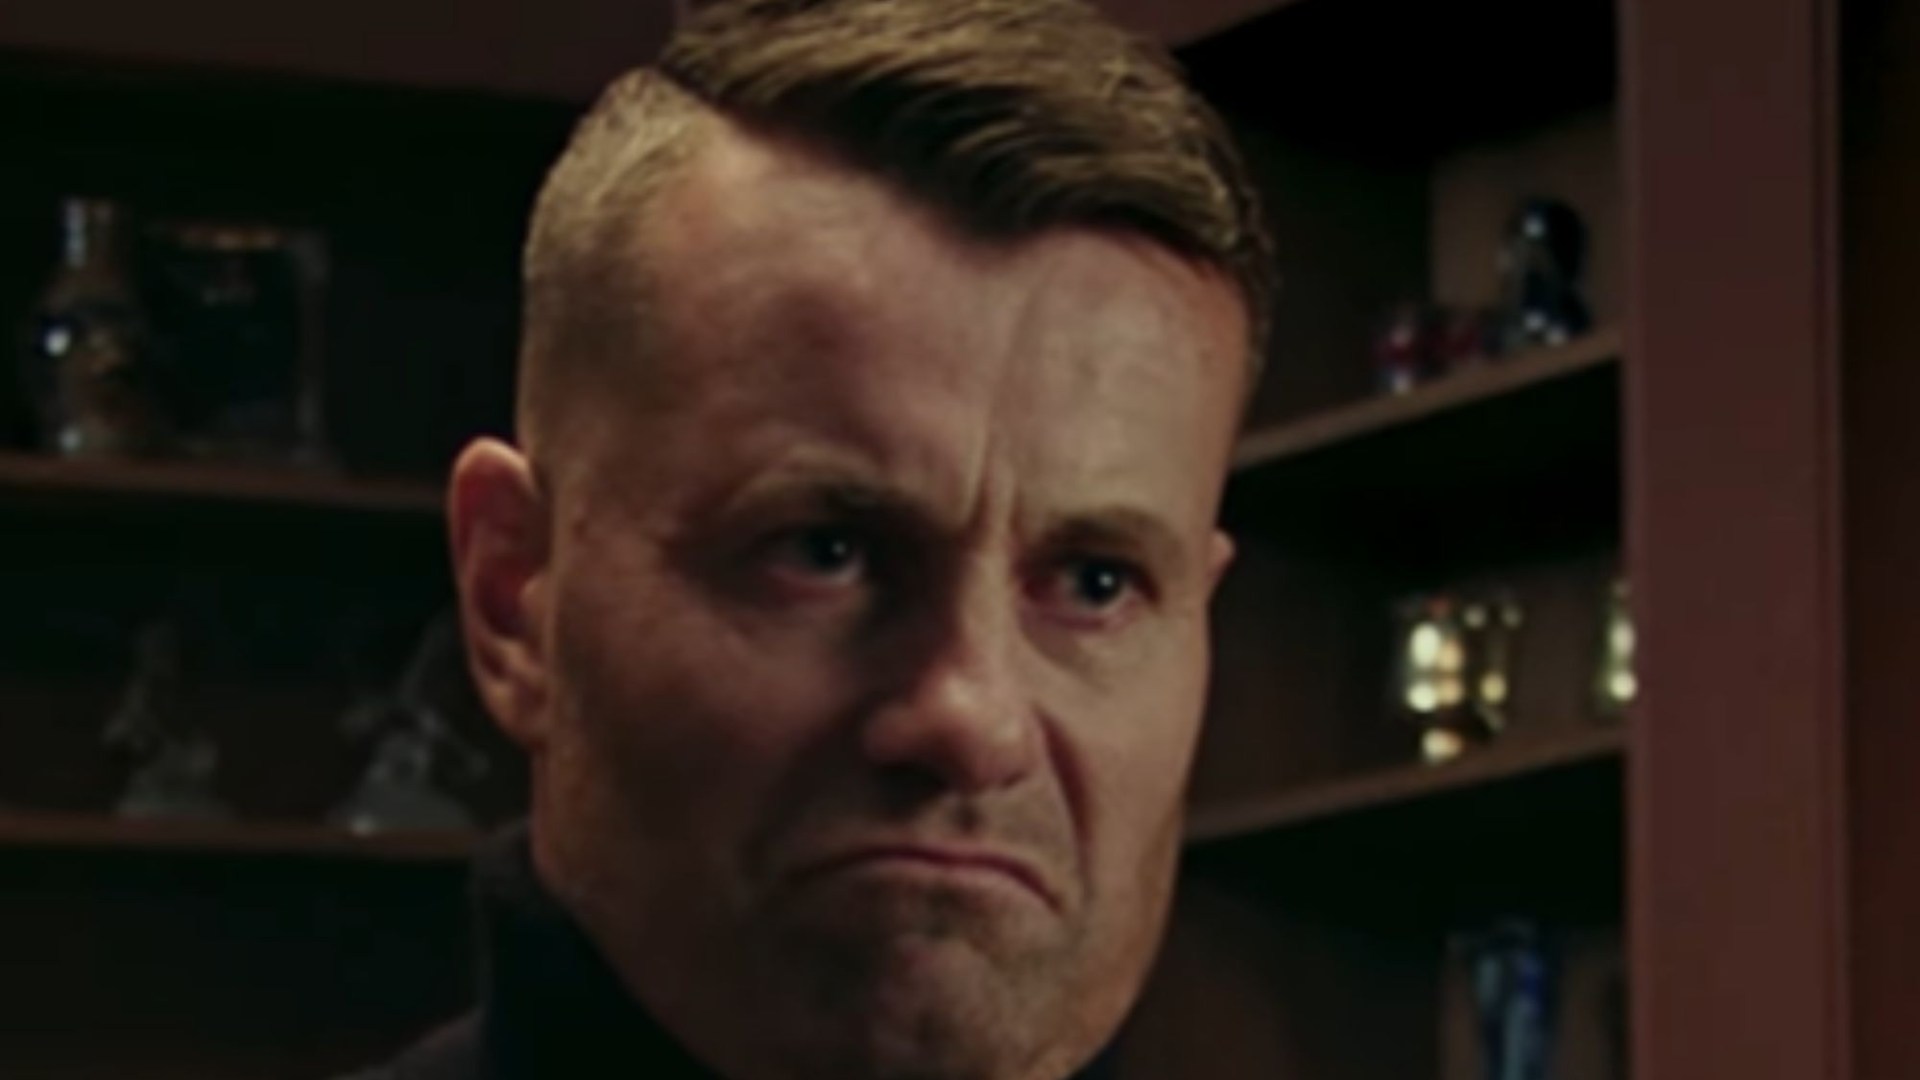 Watch Shay Given star in hilarious Al Pacino parody with Laura Woods before Dublin hosts Europa League final [Video]